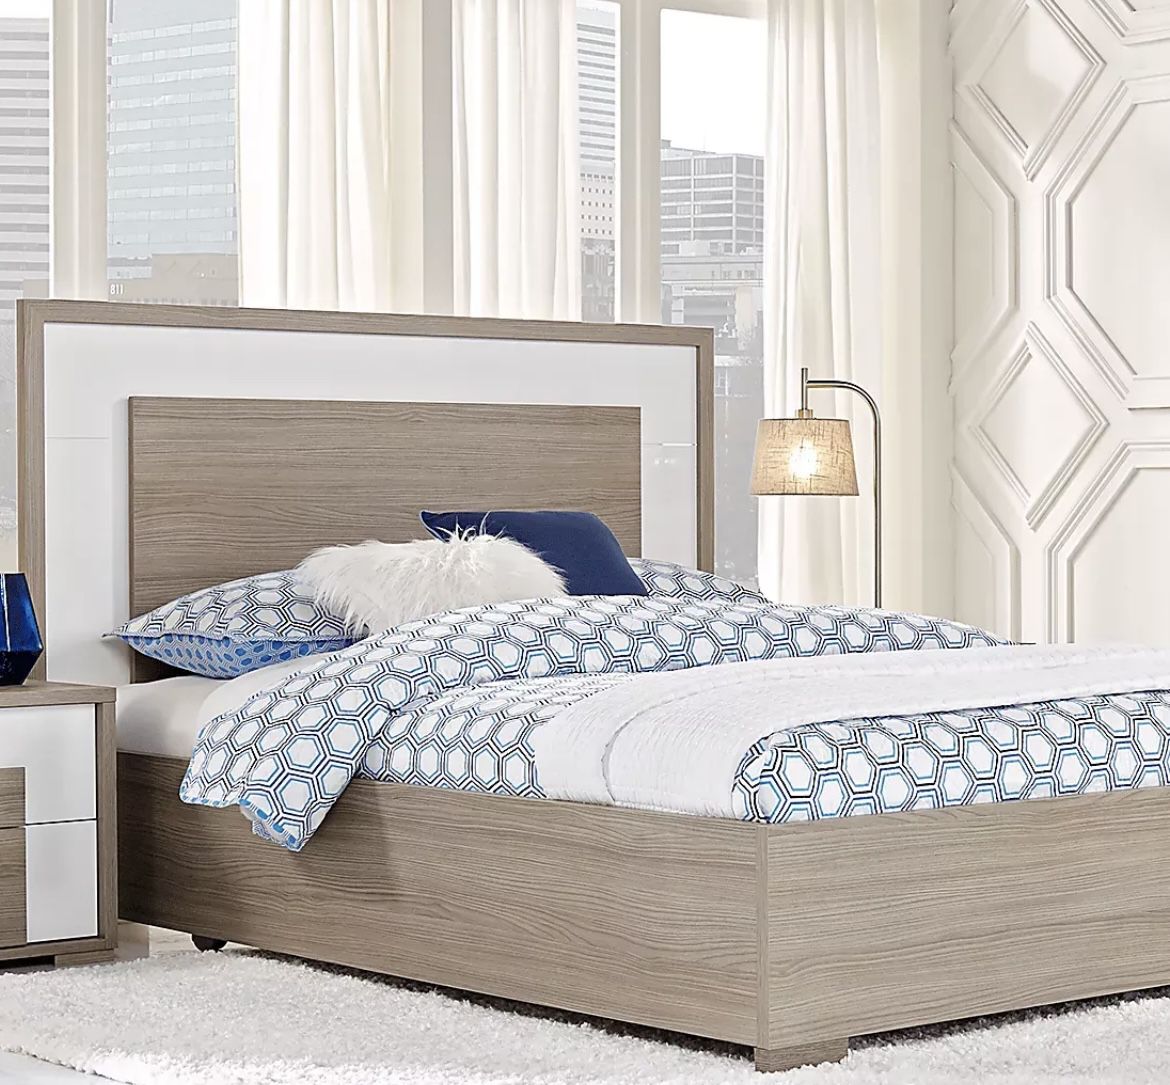 Queen white Bedroom set white and grey wood 